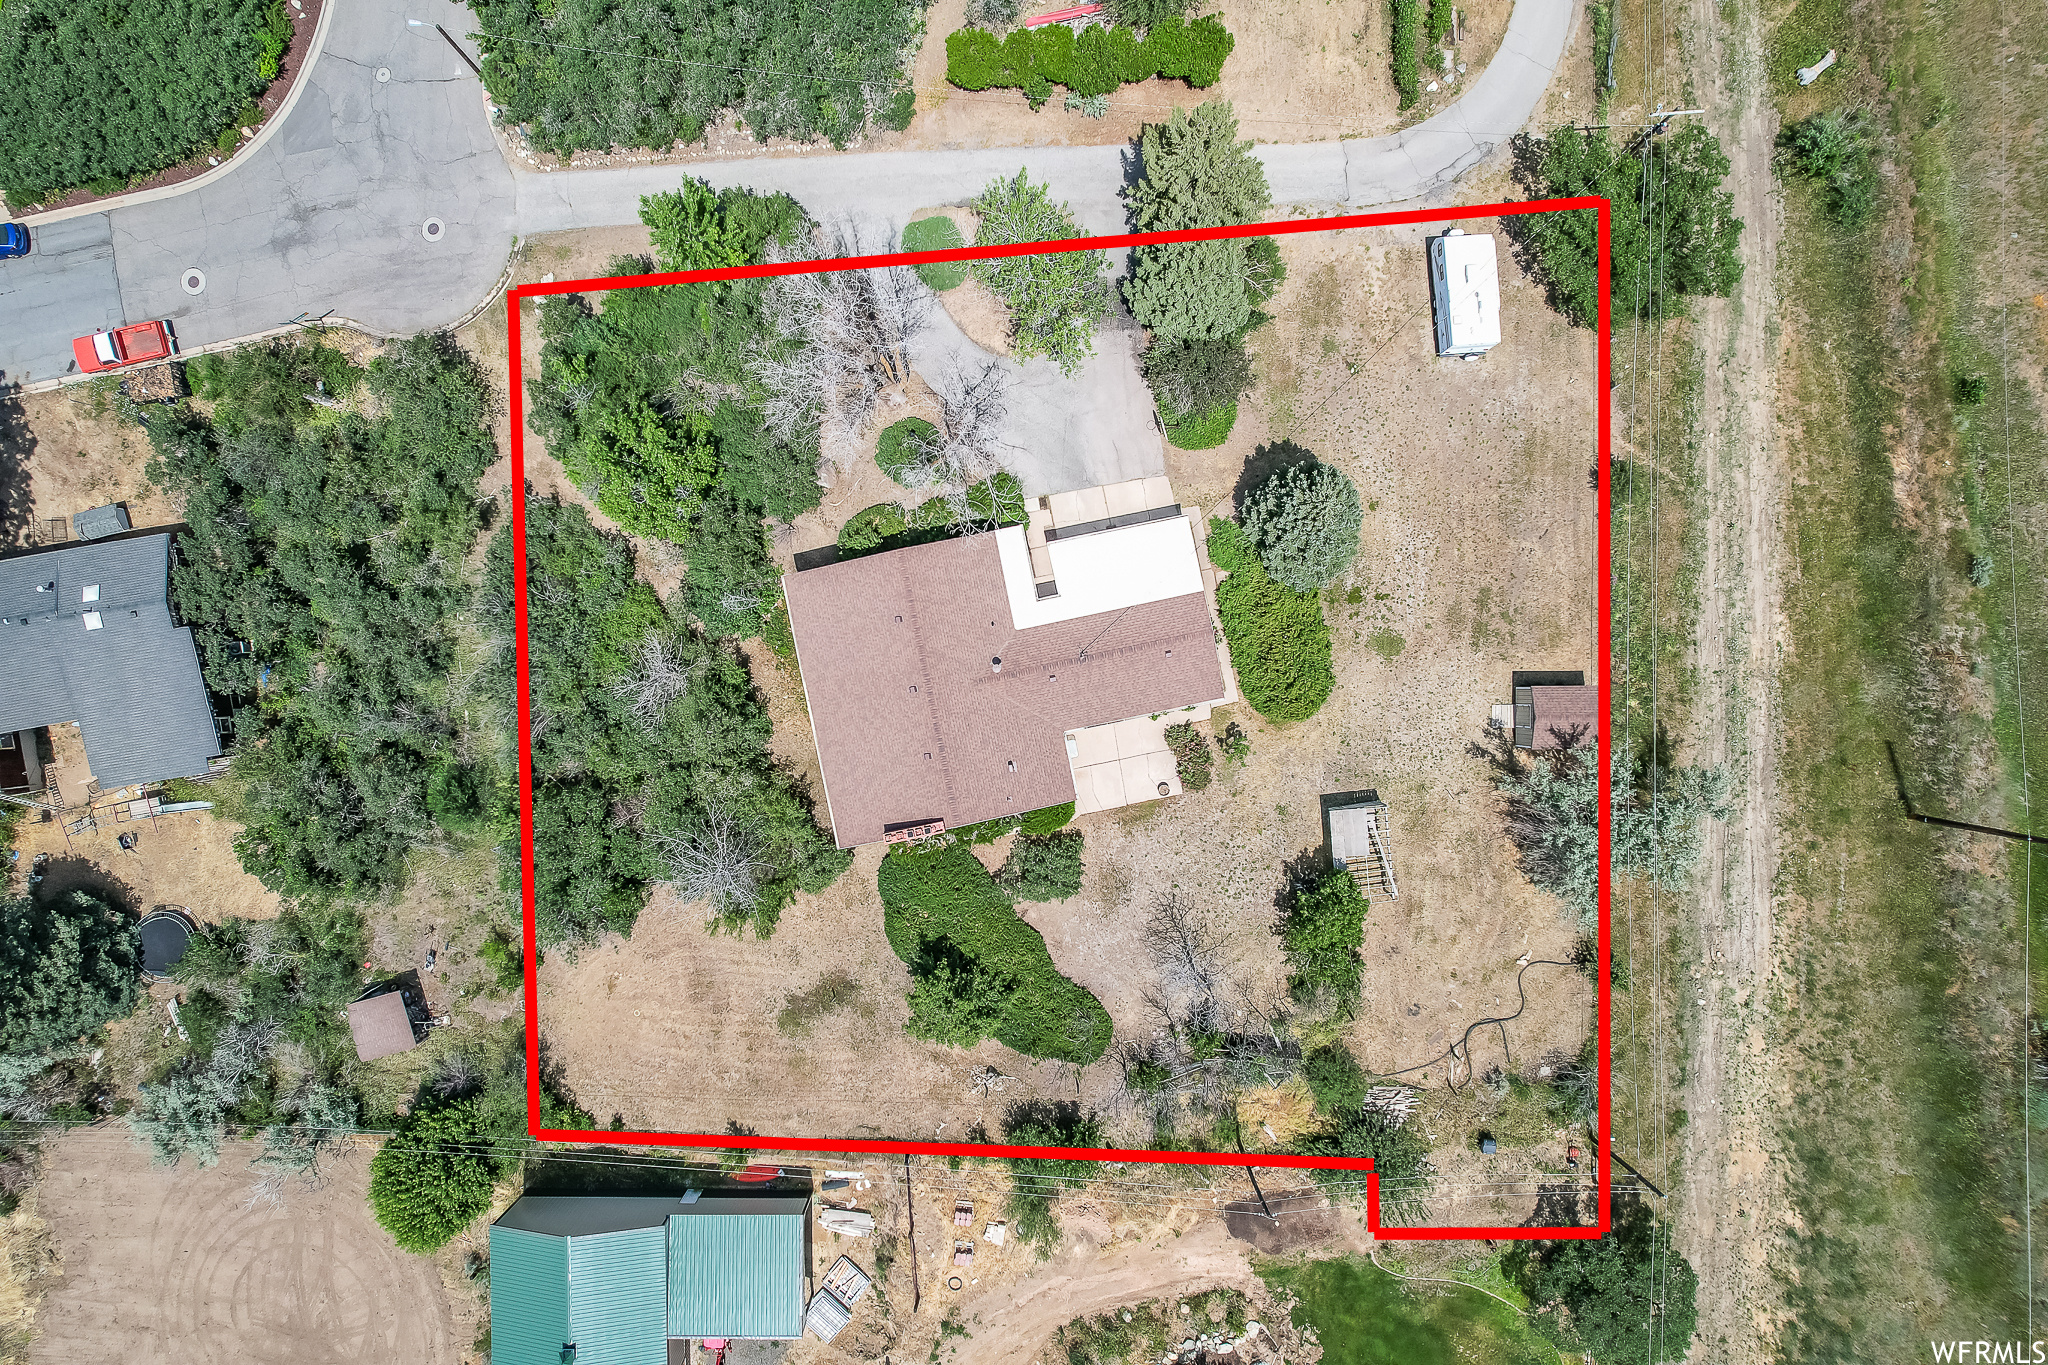 Red outlines usable area for homeowner. Buyer to verify exact boundaries.